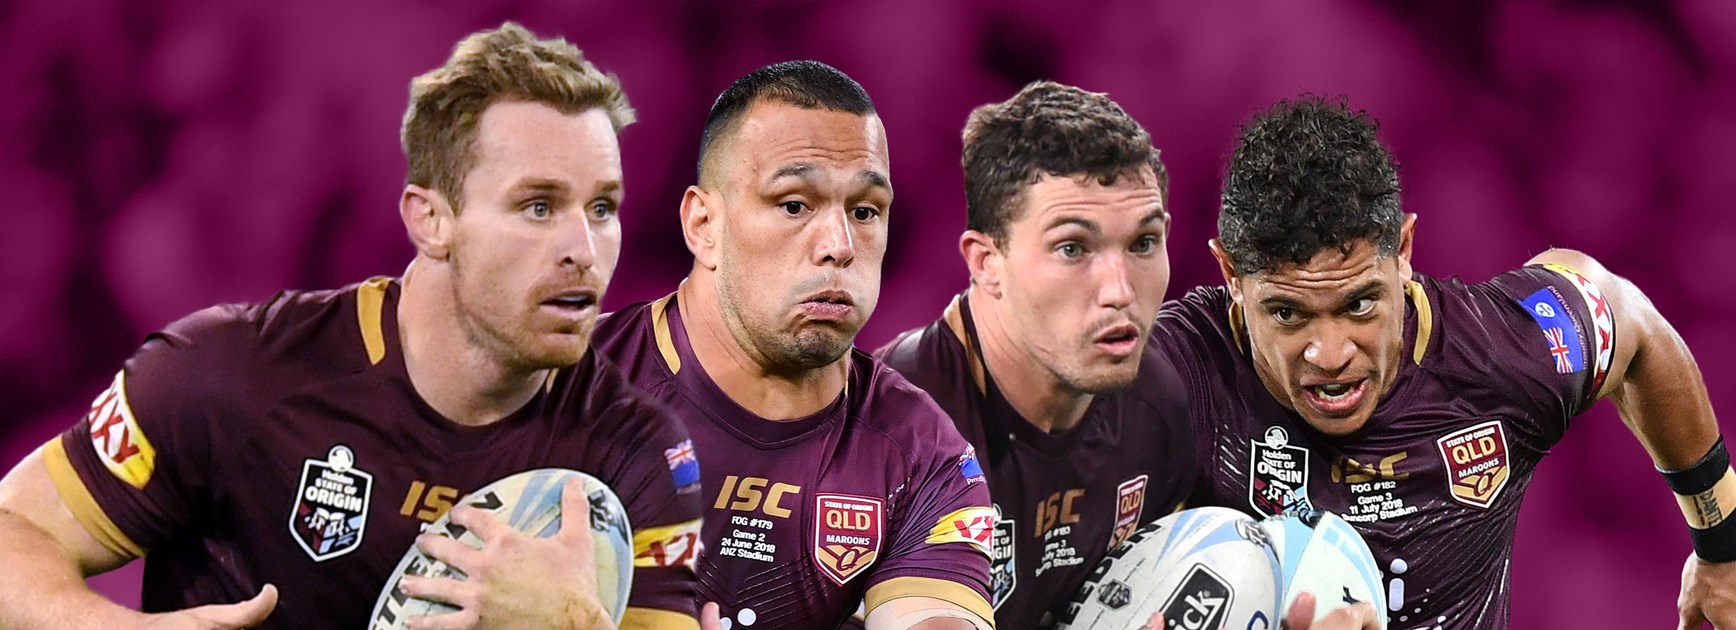 Ranking the Maroons backs candidates for 2019 Origin